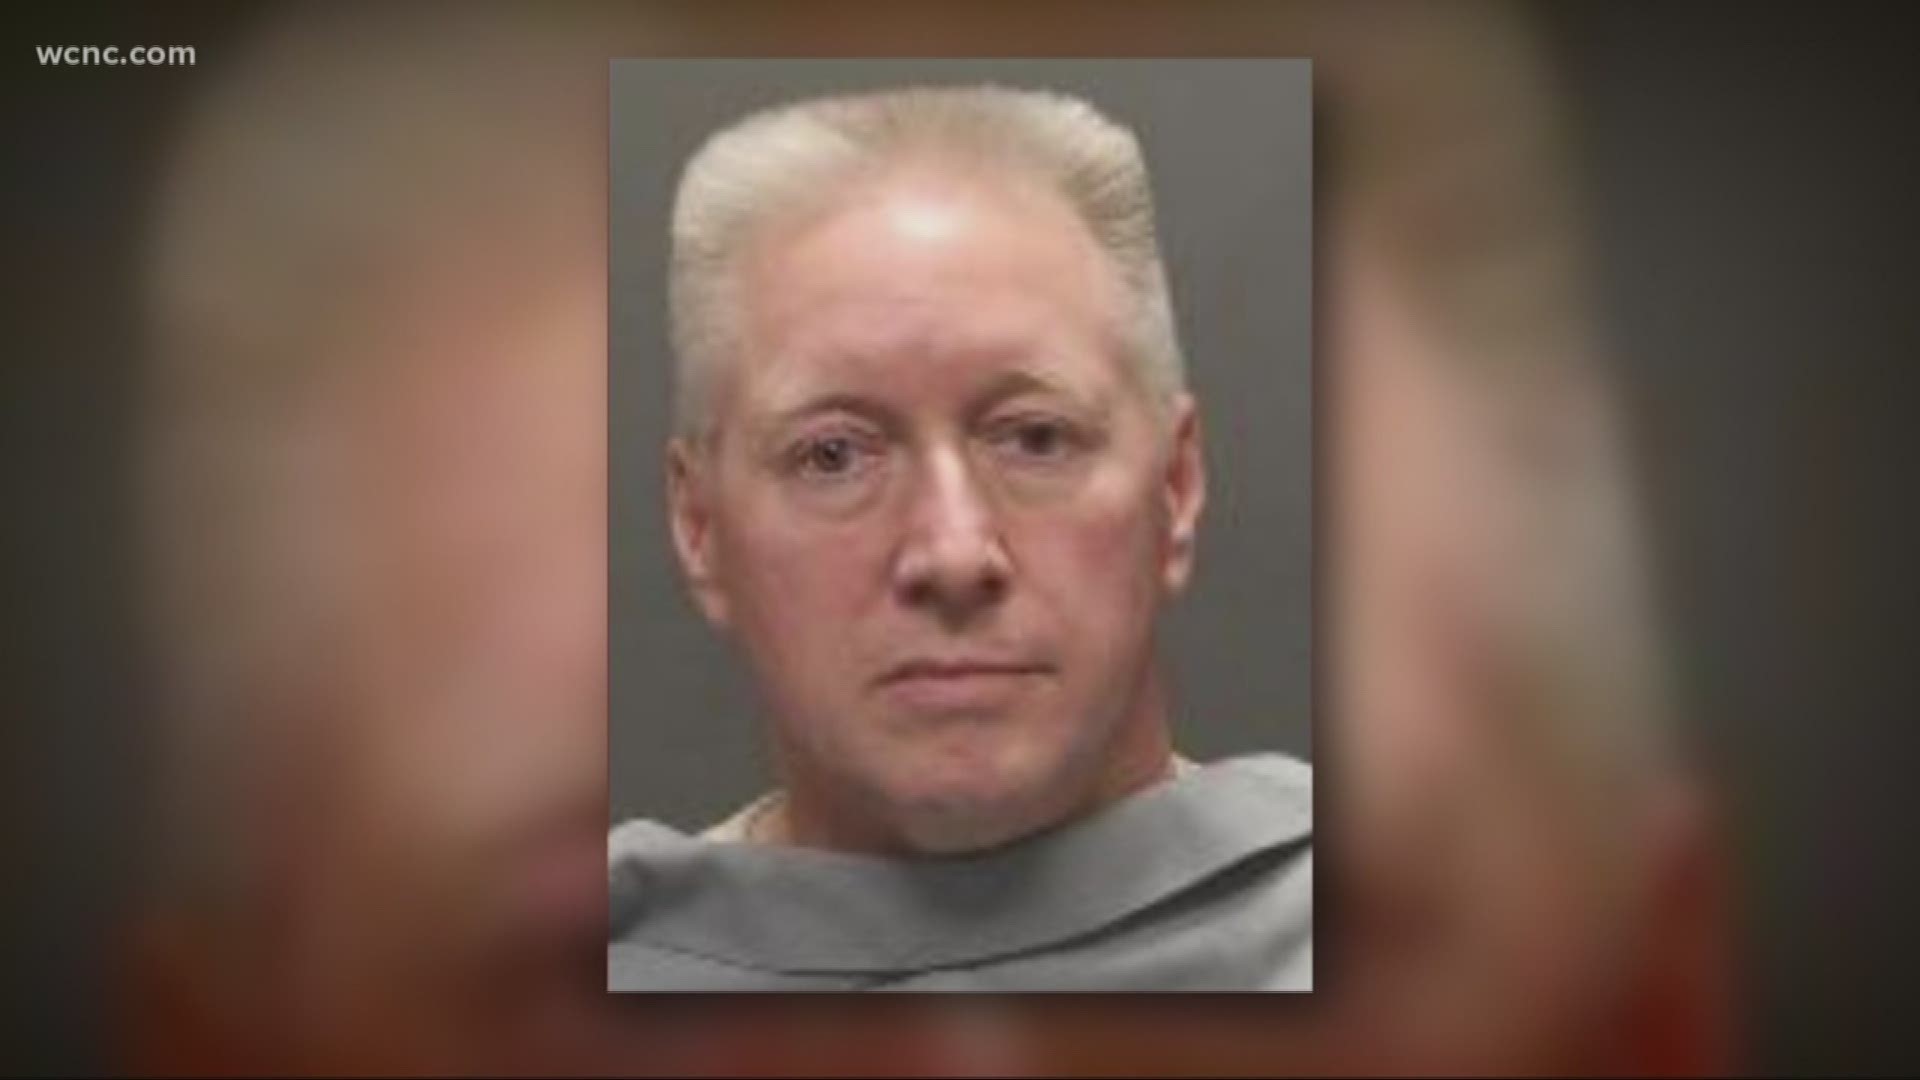 A North Carolina man who is accused of killing his wife was arrested Sunday in Arizona. Deputies say 57-year-old Lynn Keel was taken into custody during a traffic stop after someone saw him and tipped off officials.